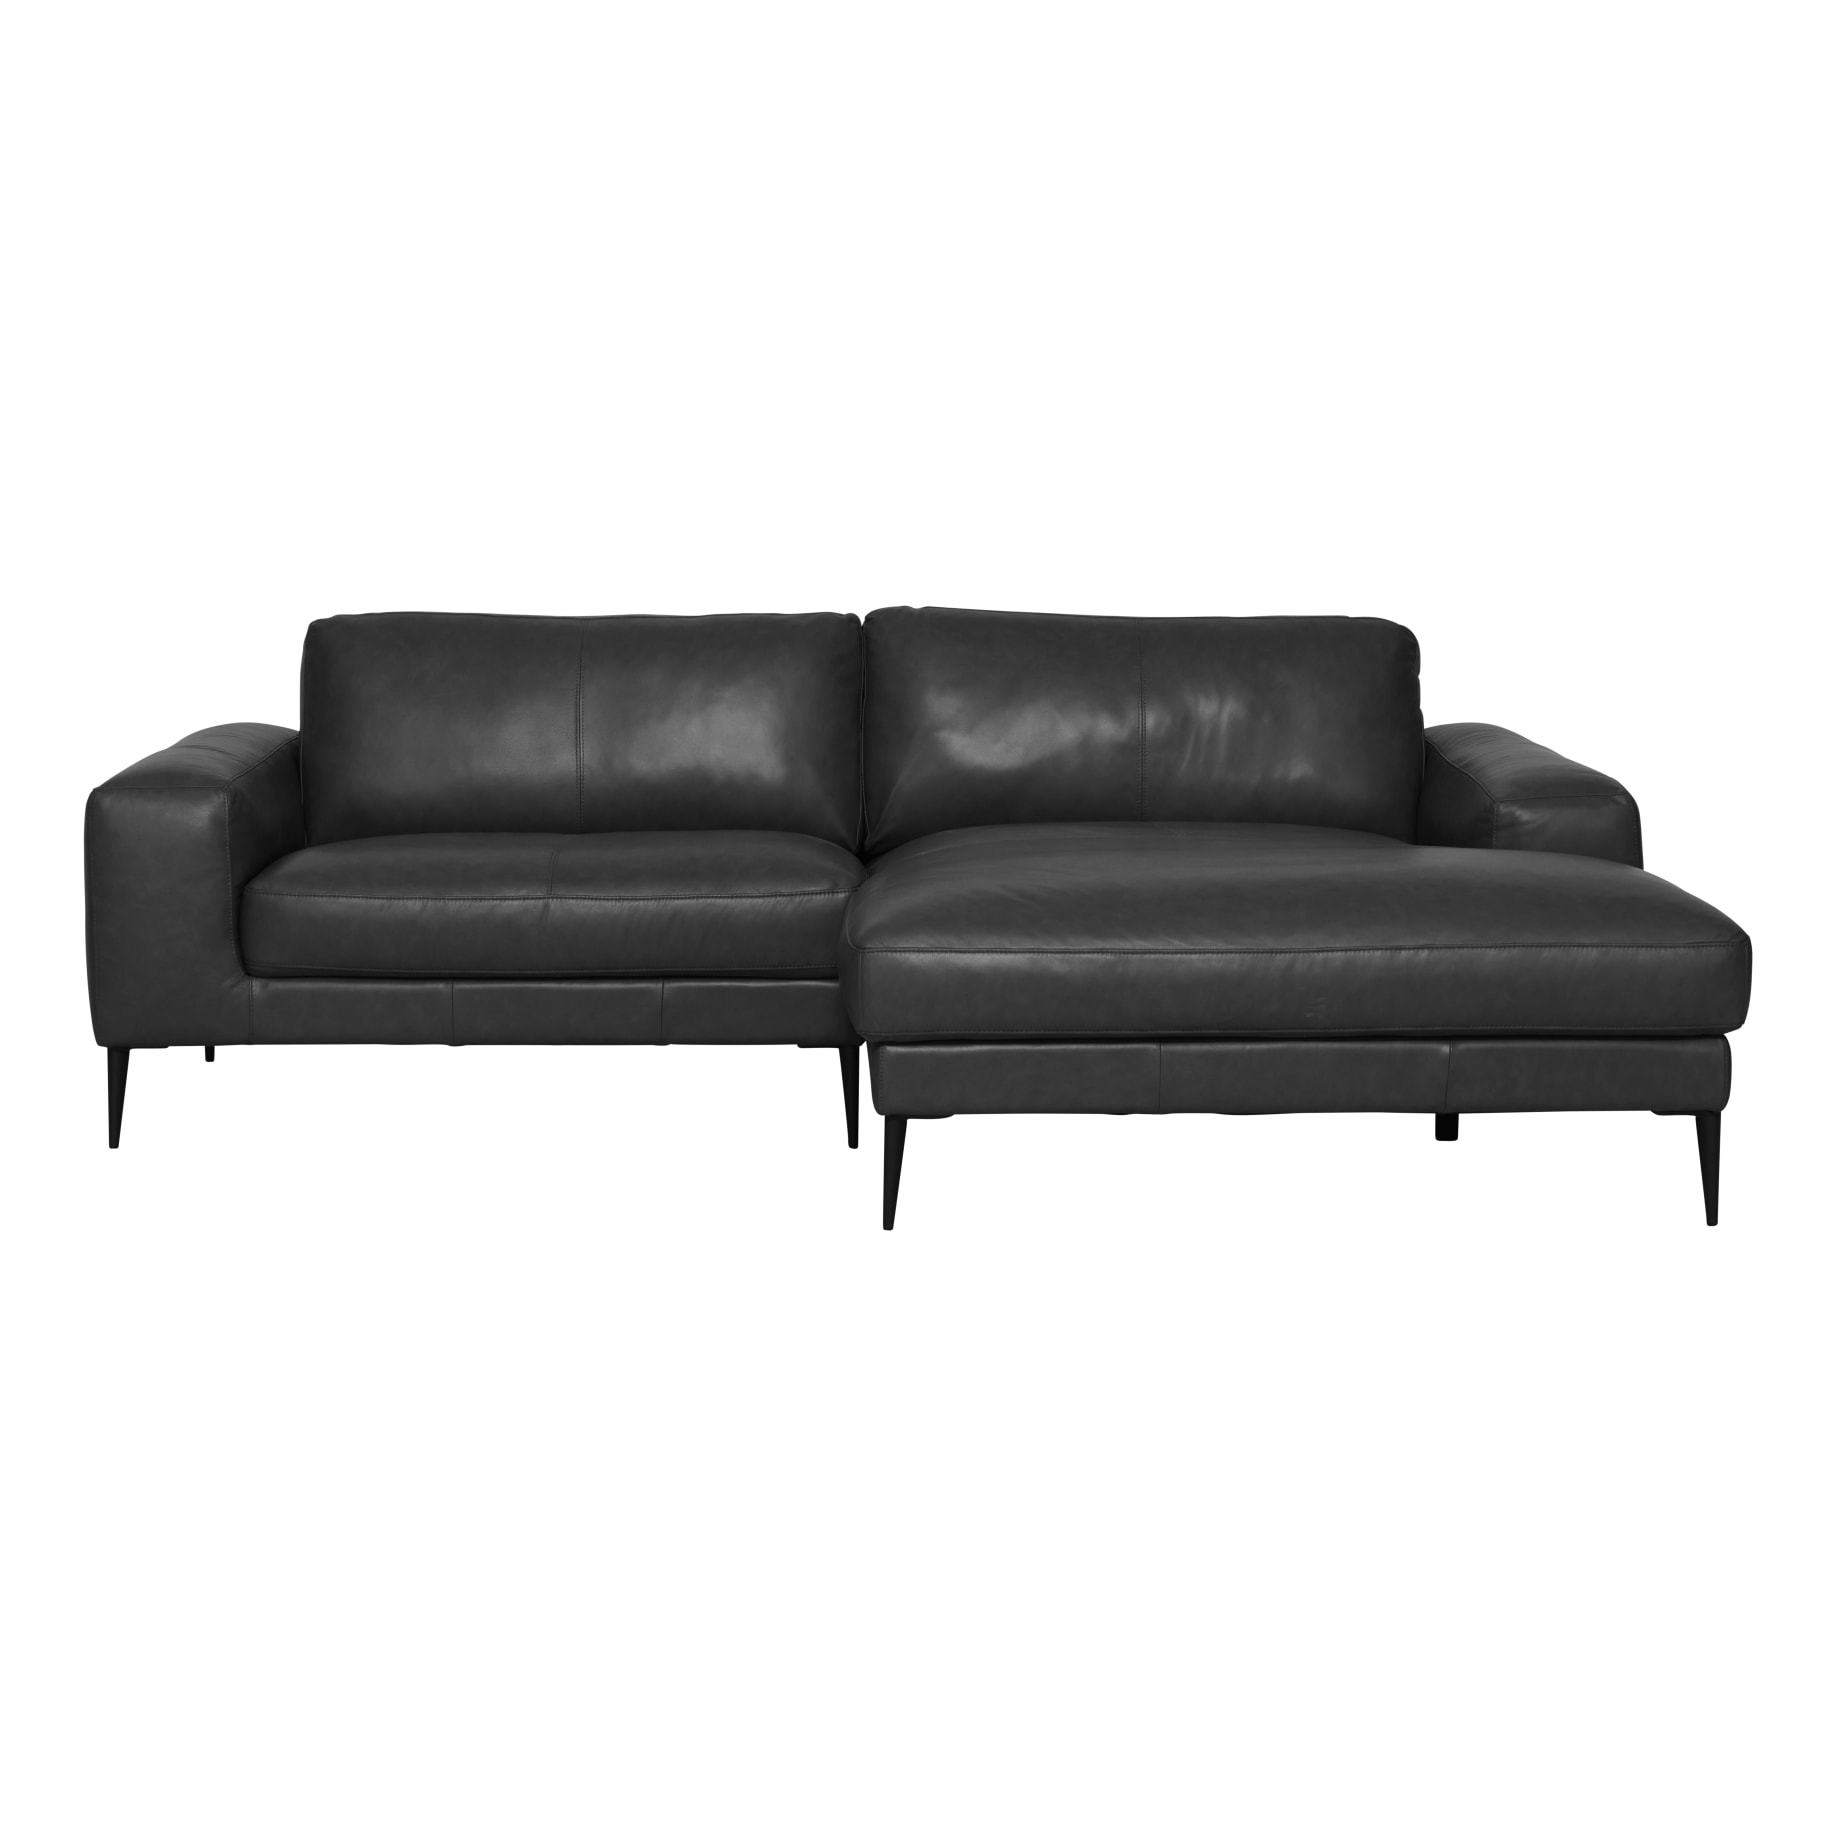 Amory Double Chaise RHF in Alpine Leather Black